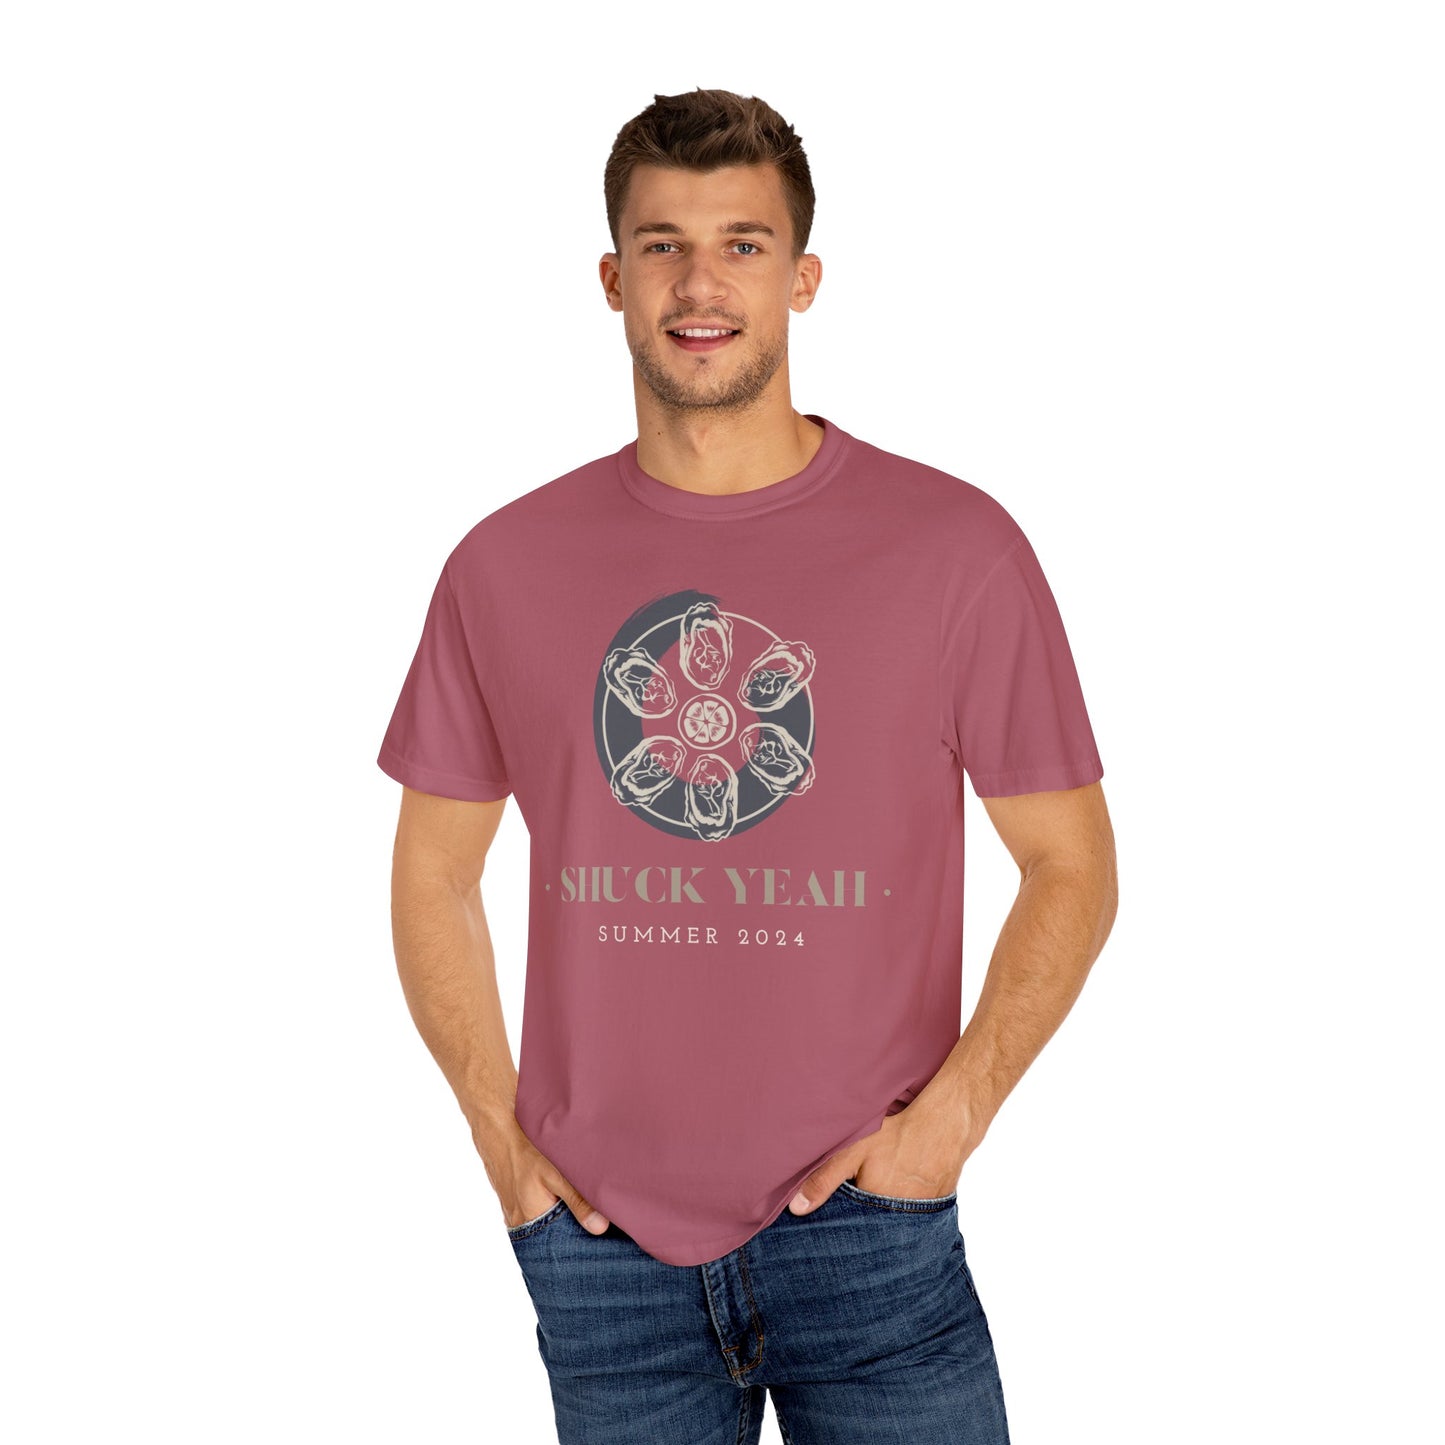 Shuck Yeah Summer 2024 Oyster T-Shirt - Comfort Colors 1717, 100% Ring-Spun Cotton, Relaxed Fit